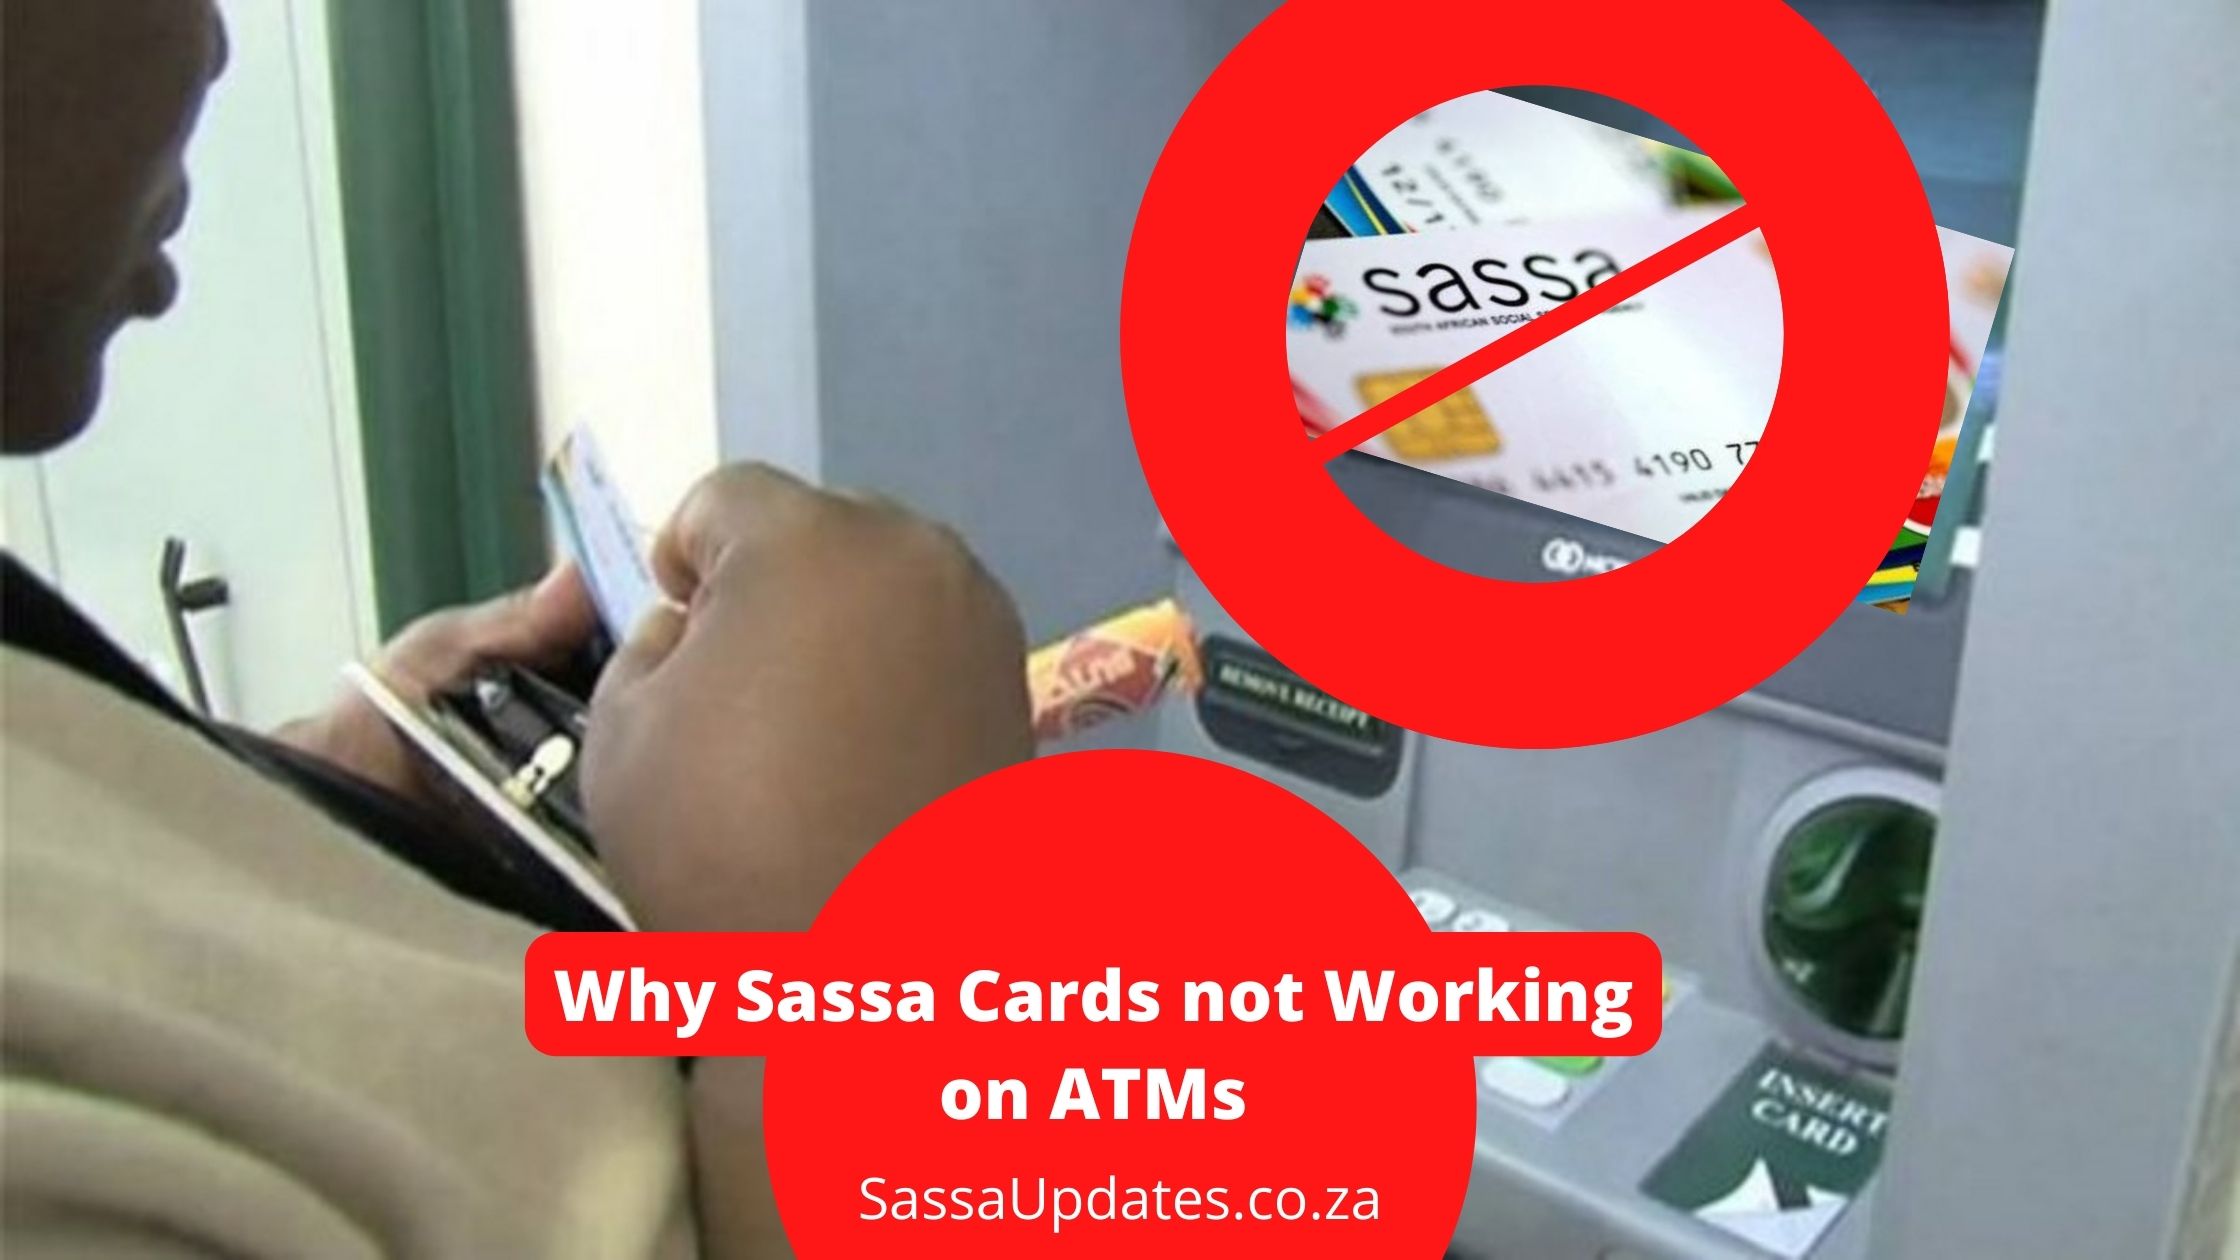 Sassa Cards not Working on ATM